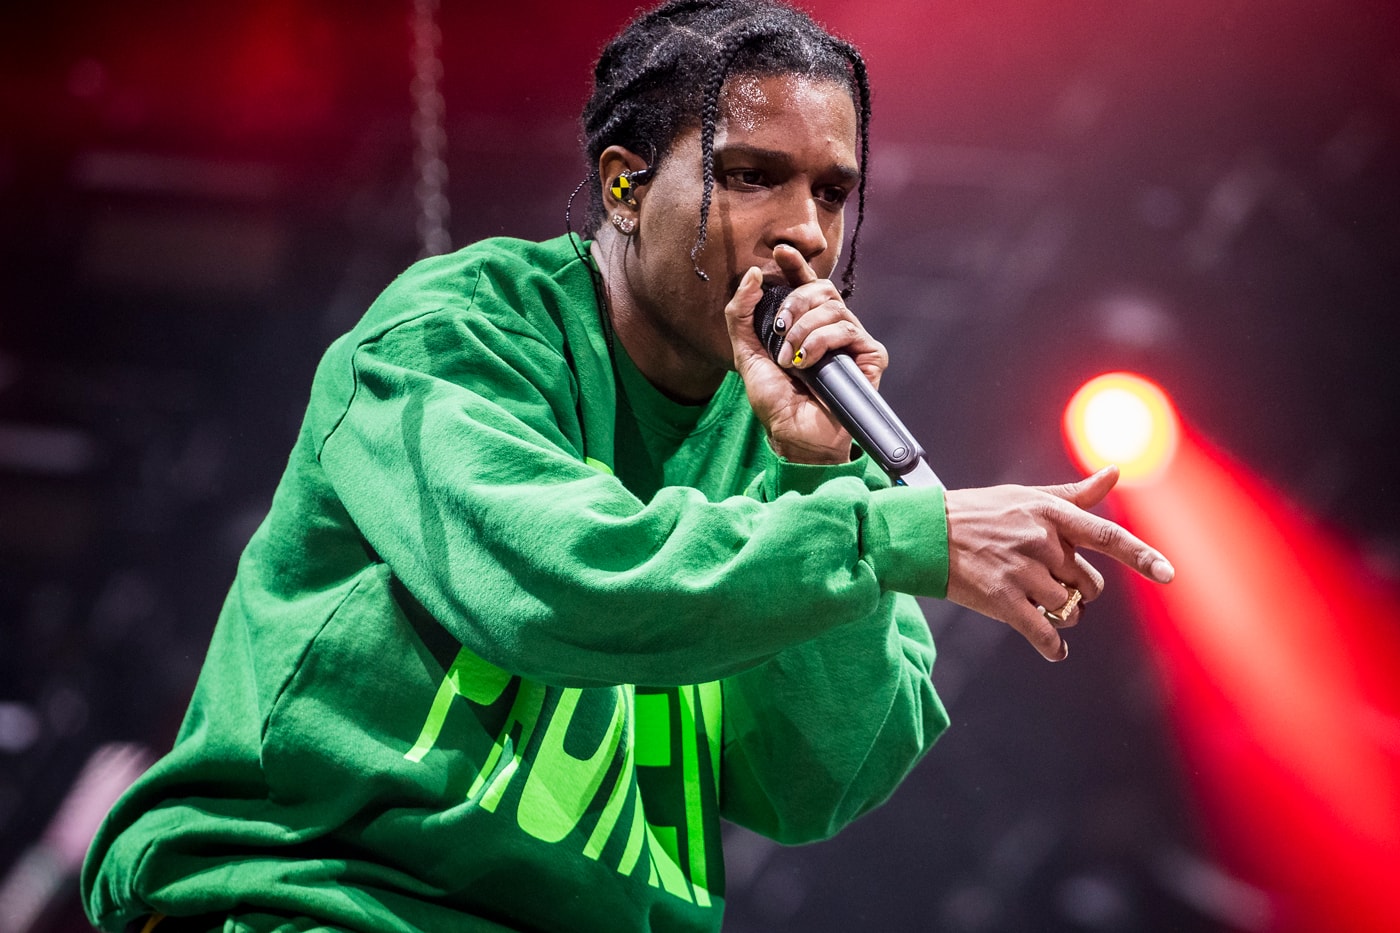 ASAP Rocky's LA Home Targeted in Armed Robbery